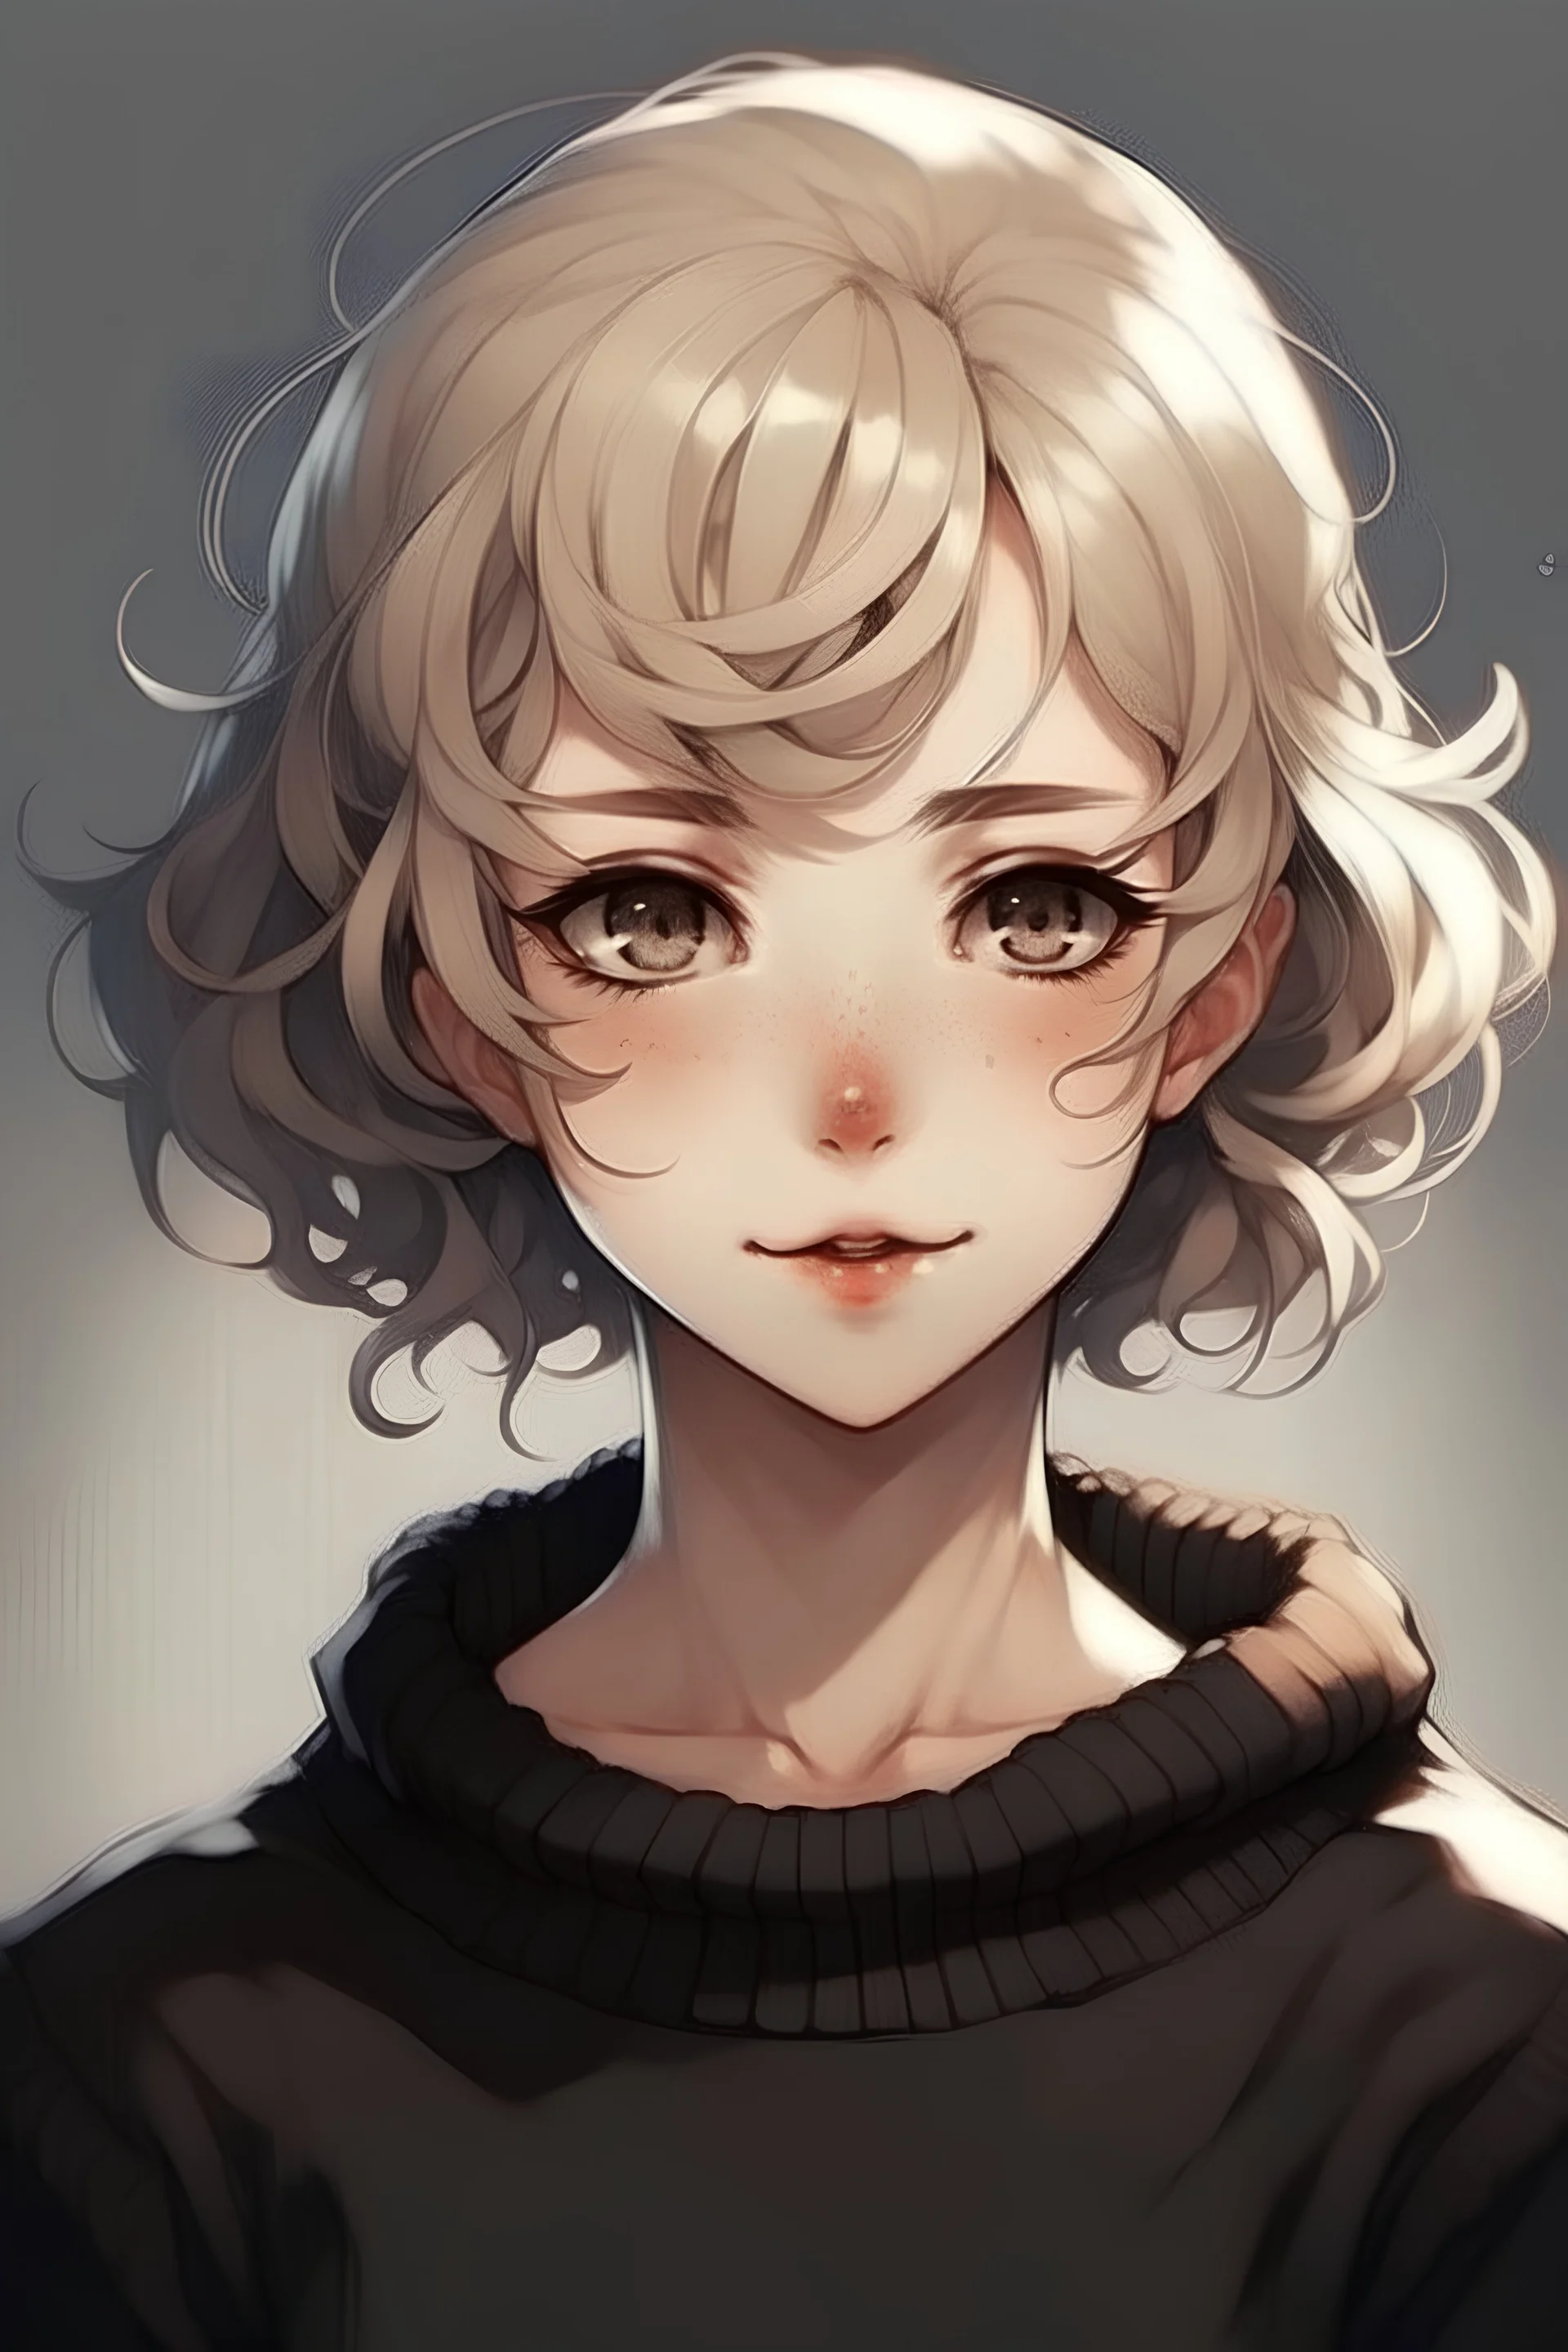 AI Art: Anime Boy With Brown Curly Hair Ver 1.4 by @Toothpatches#2988 |  PixAI